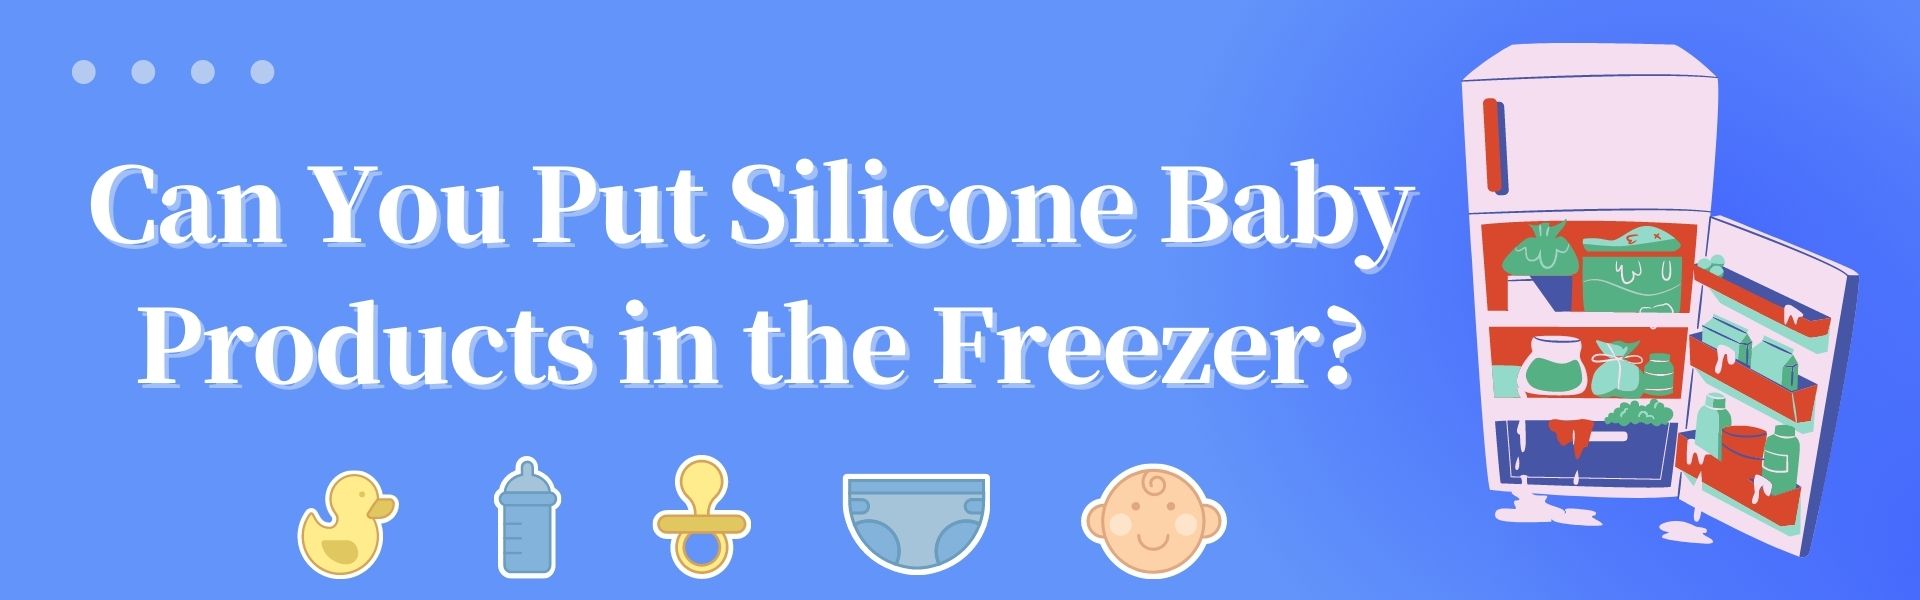 Can You Put Silicone Baby Products in the Freezer?